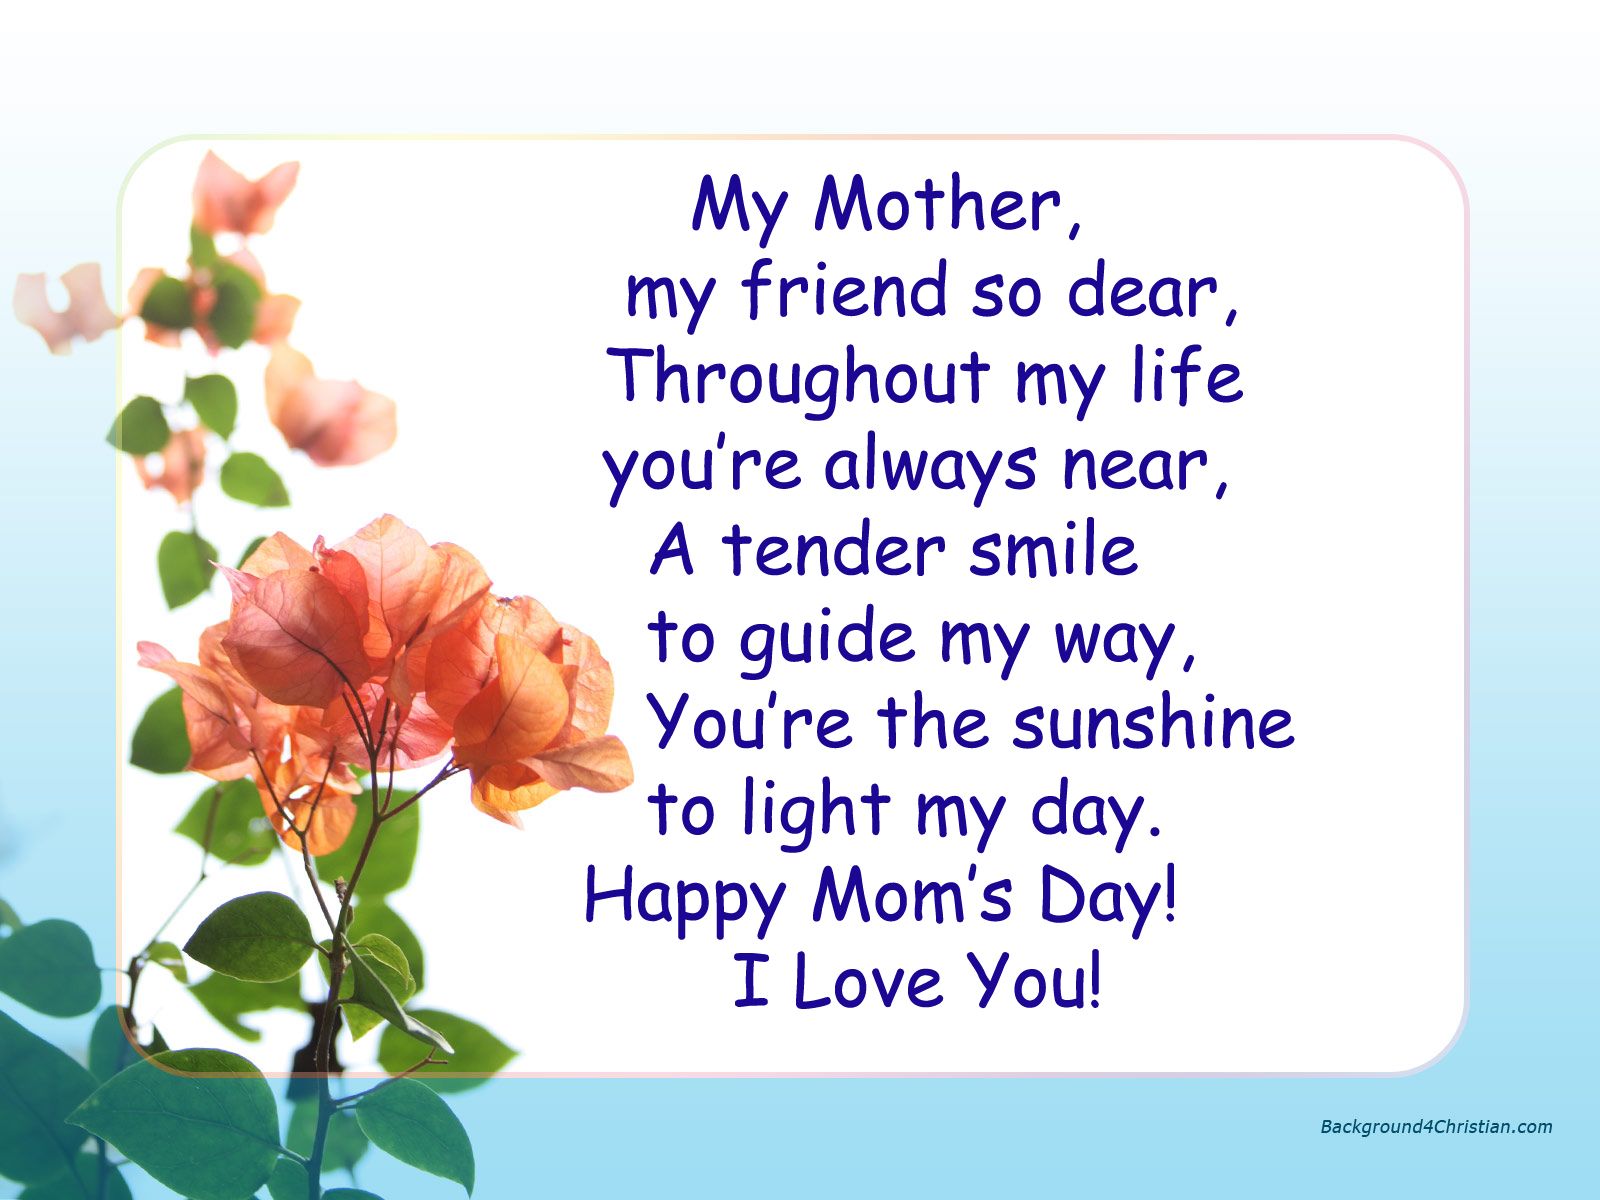 Mothers Day Poems (poetry) HD Image Animated Gif Meme DP Profile